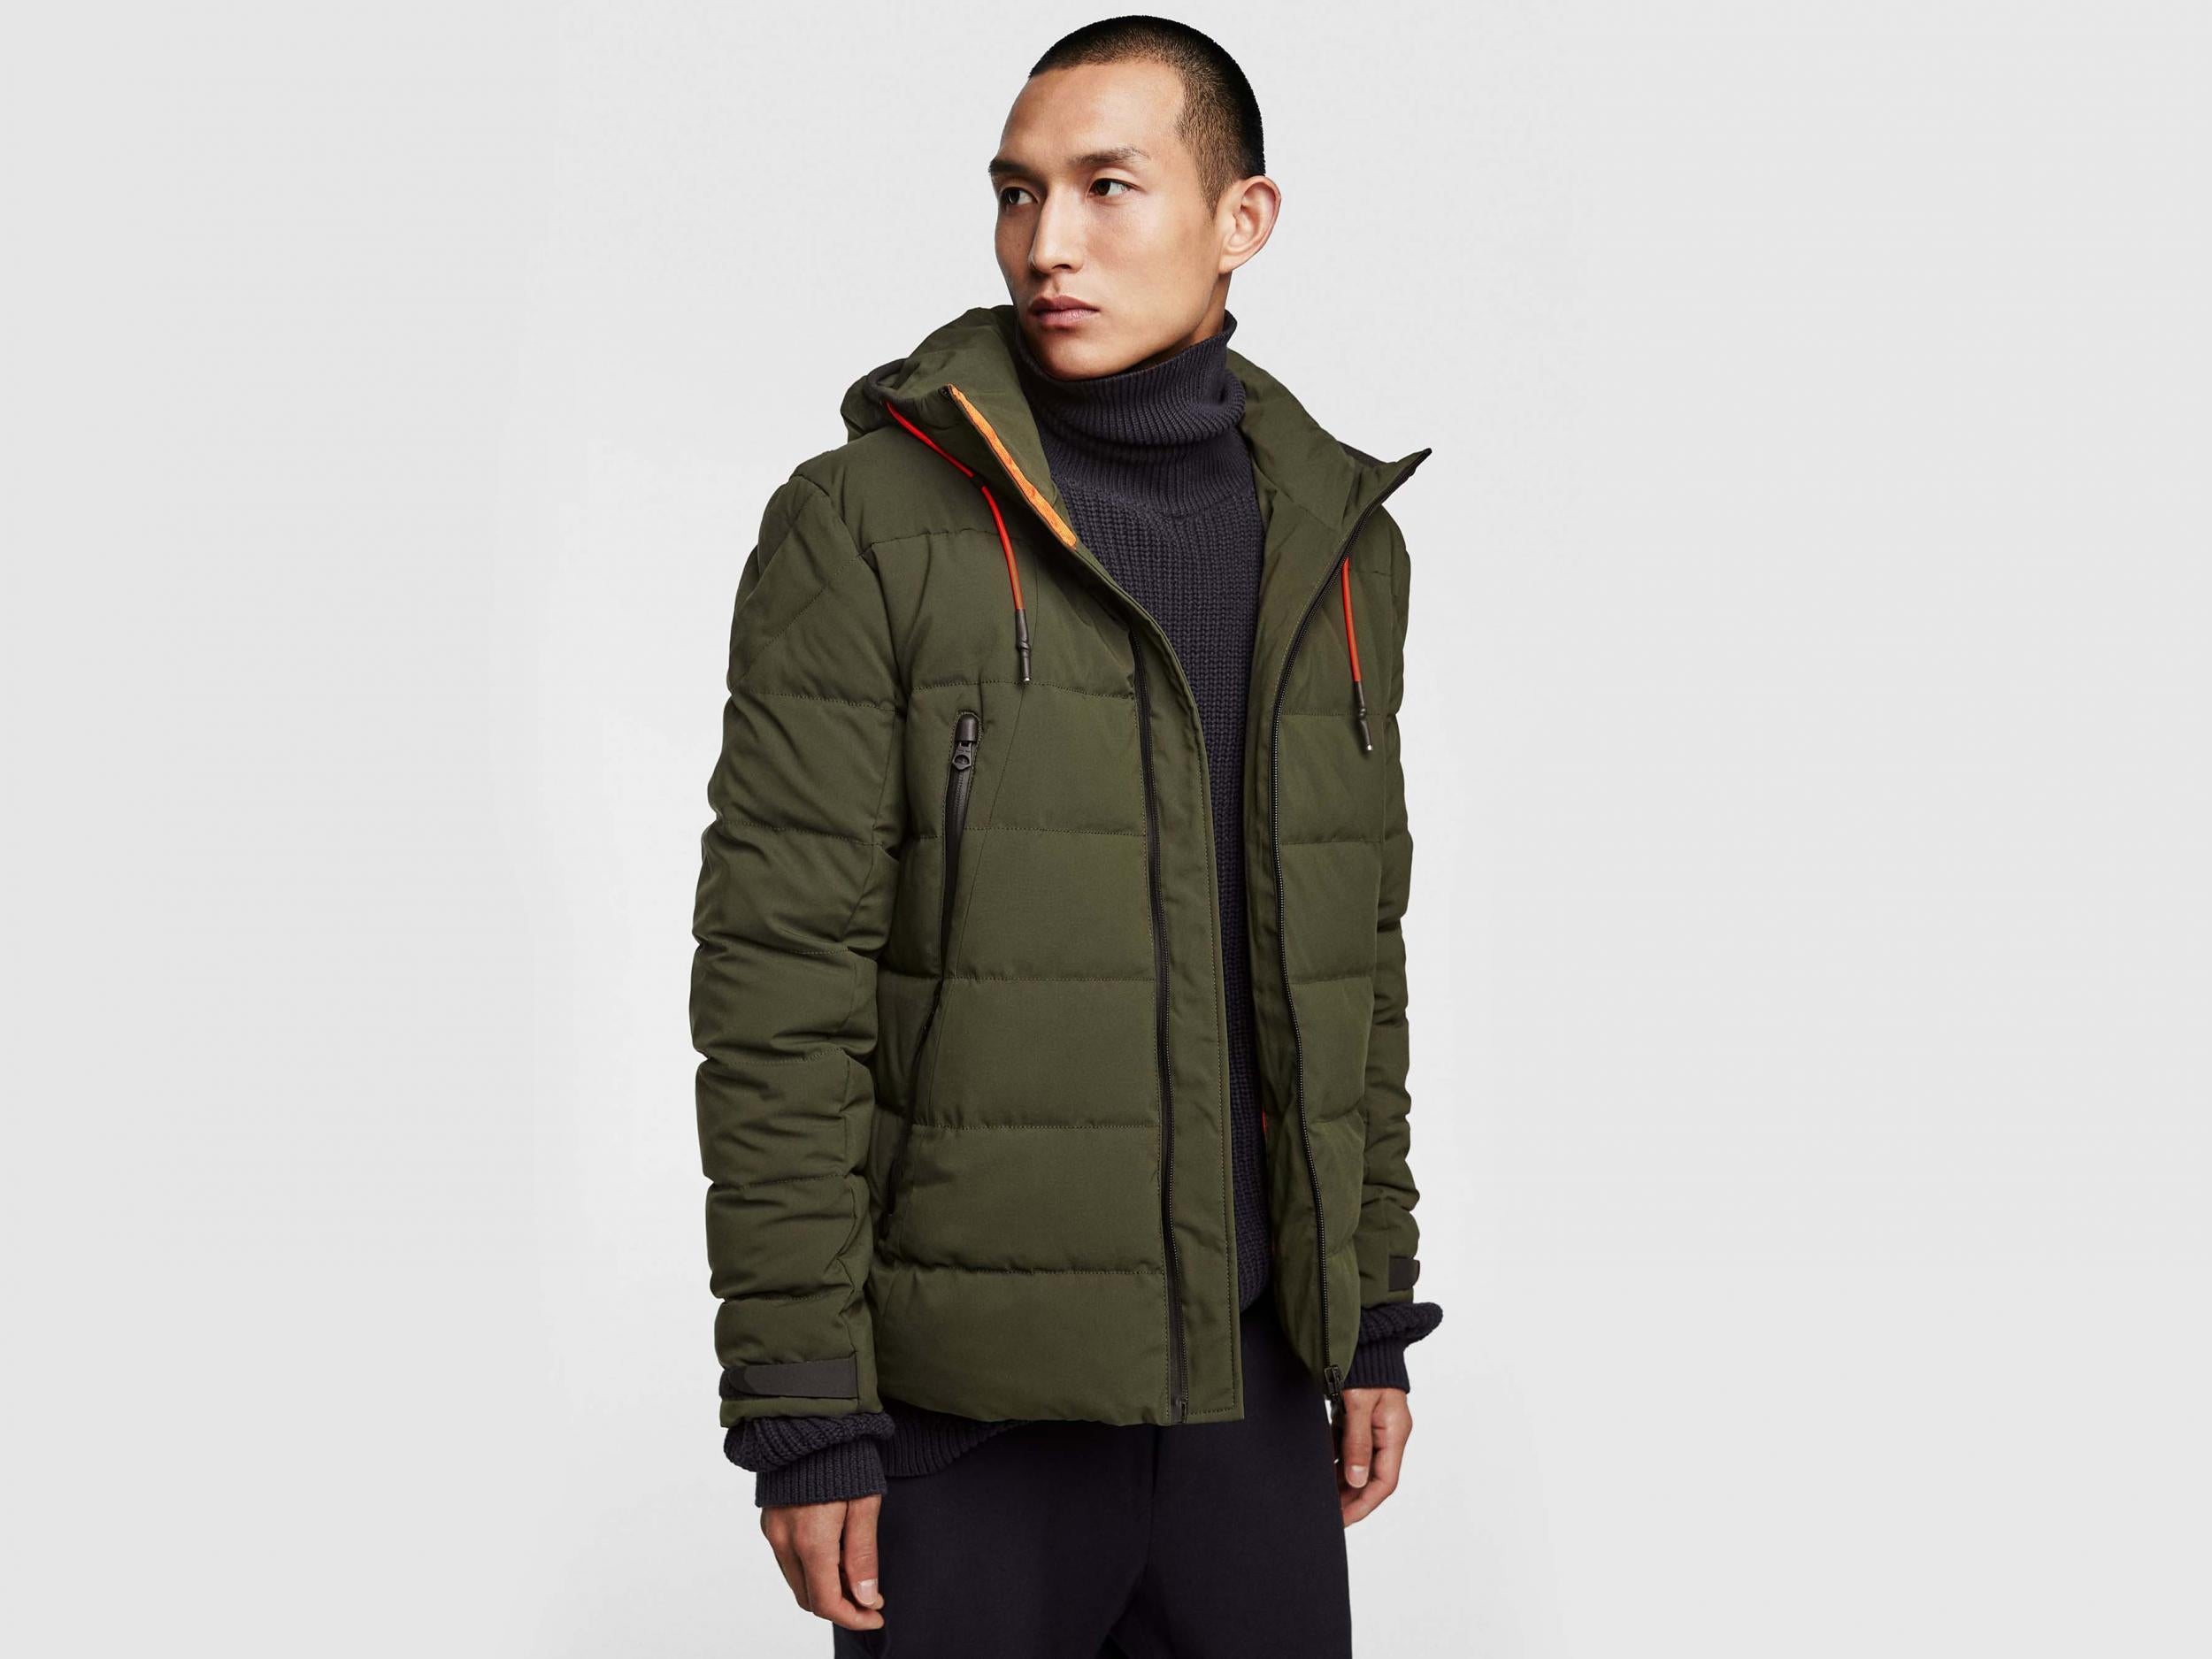 https://static.independent.co.uk/s3fs-public/thumbnails/image/2018/09/26/22/down-puffer-jacket-with-hood-zara-lead.jpg